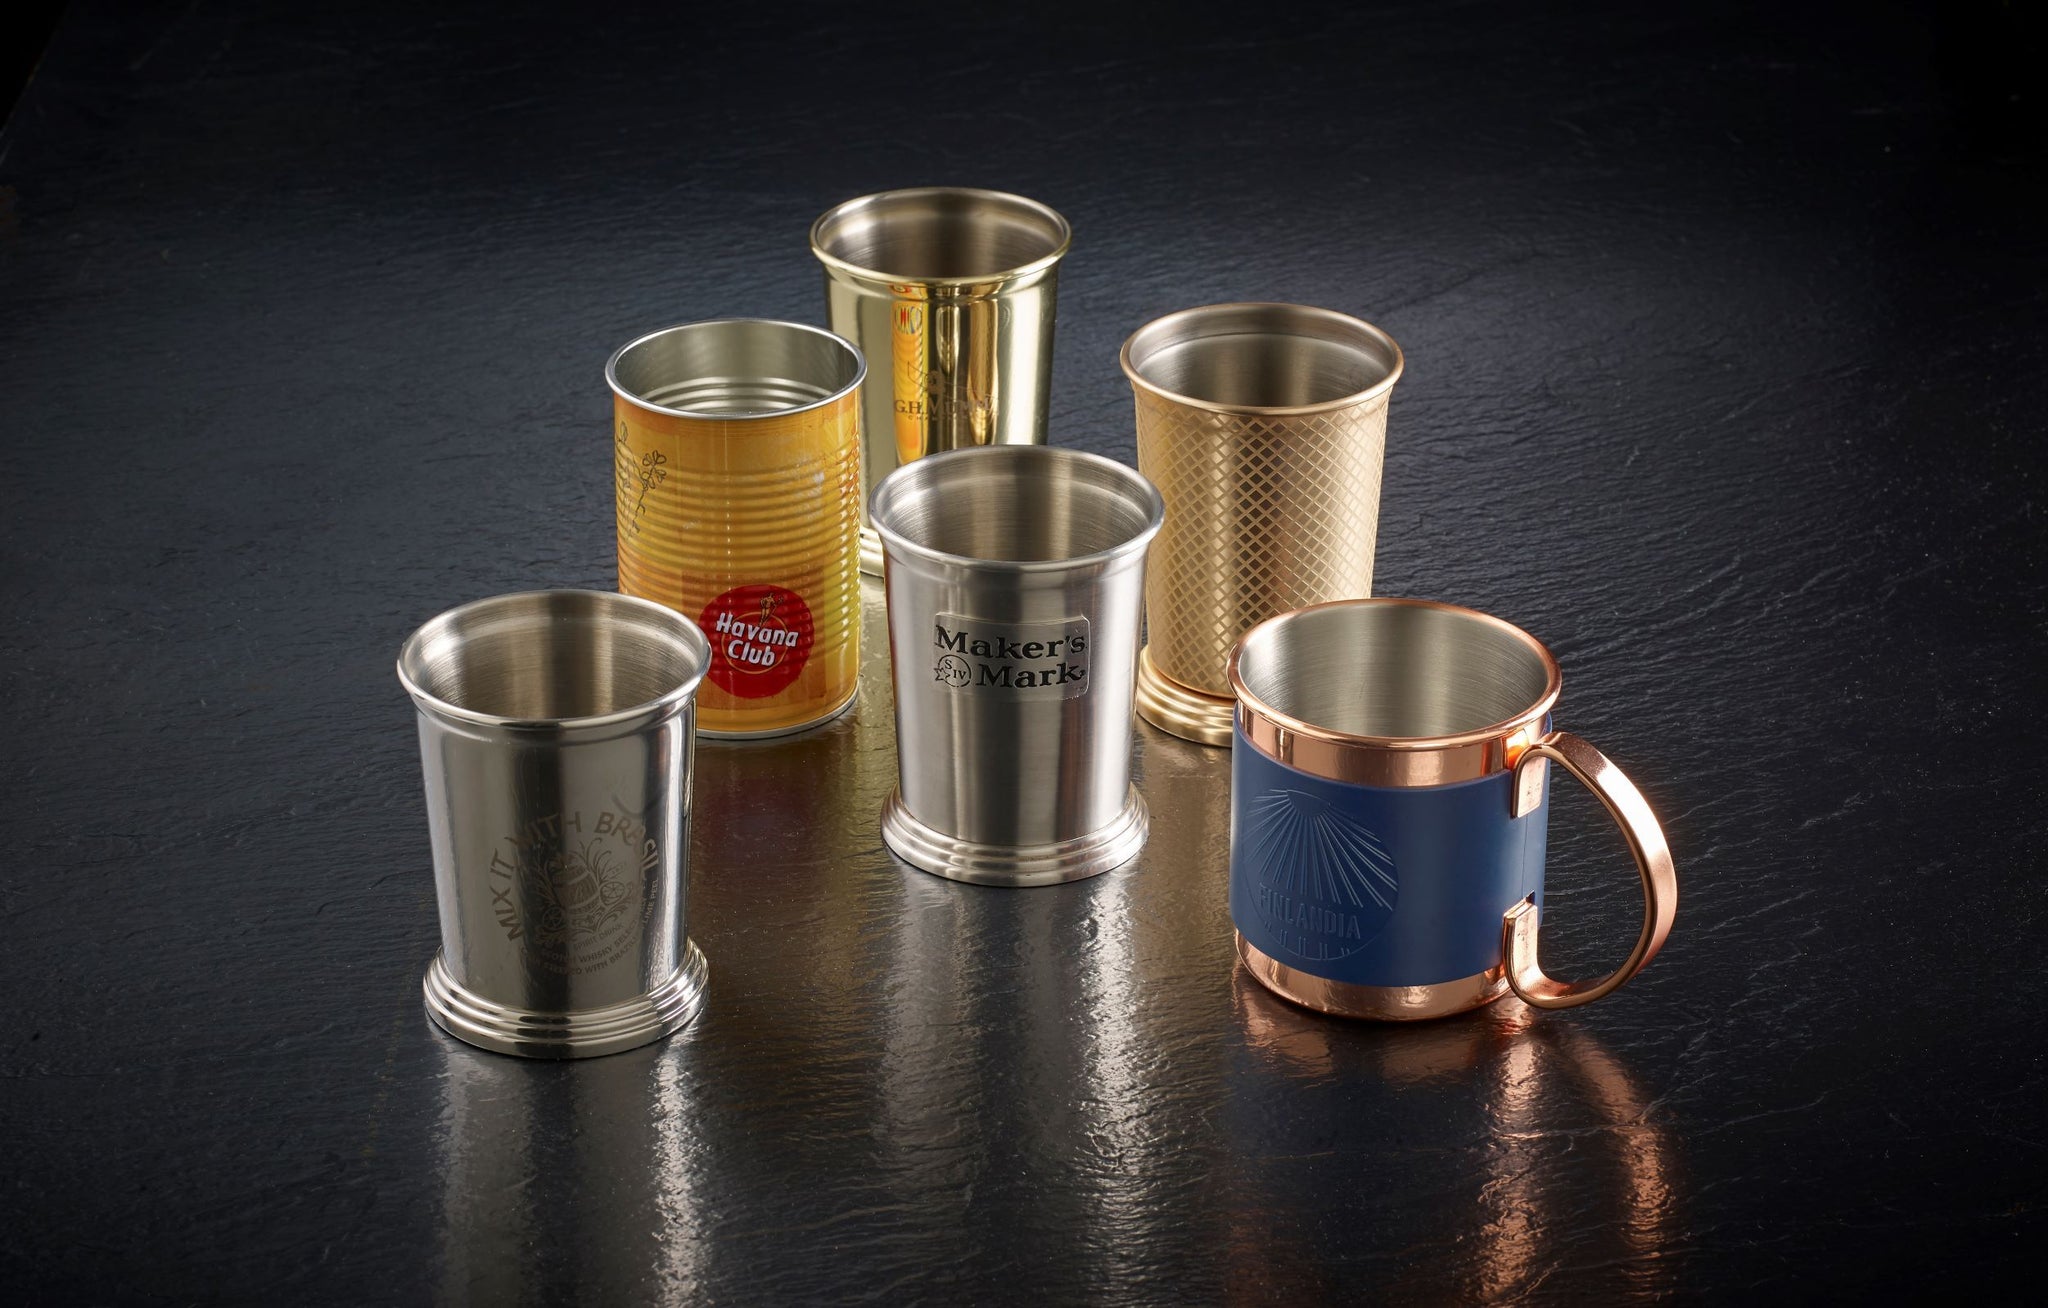 Other Glass & Metal Drinkware